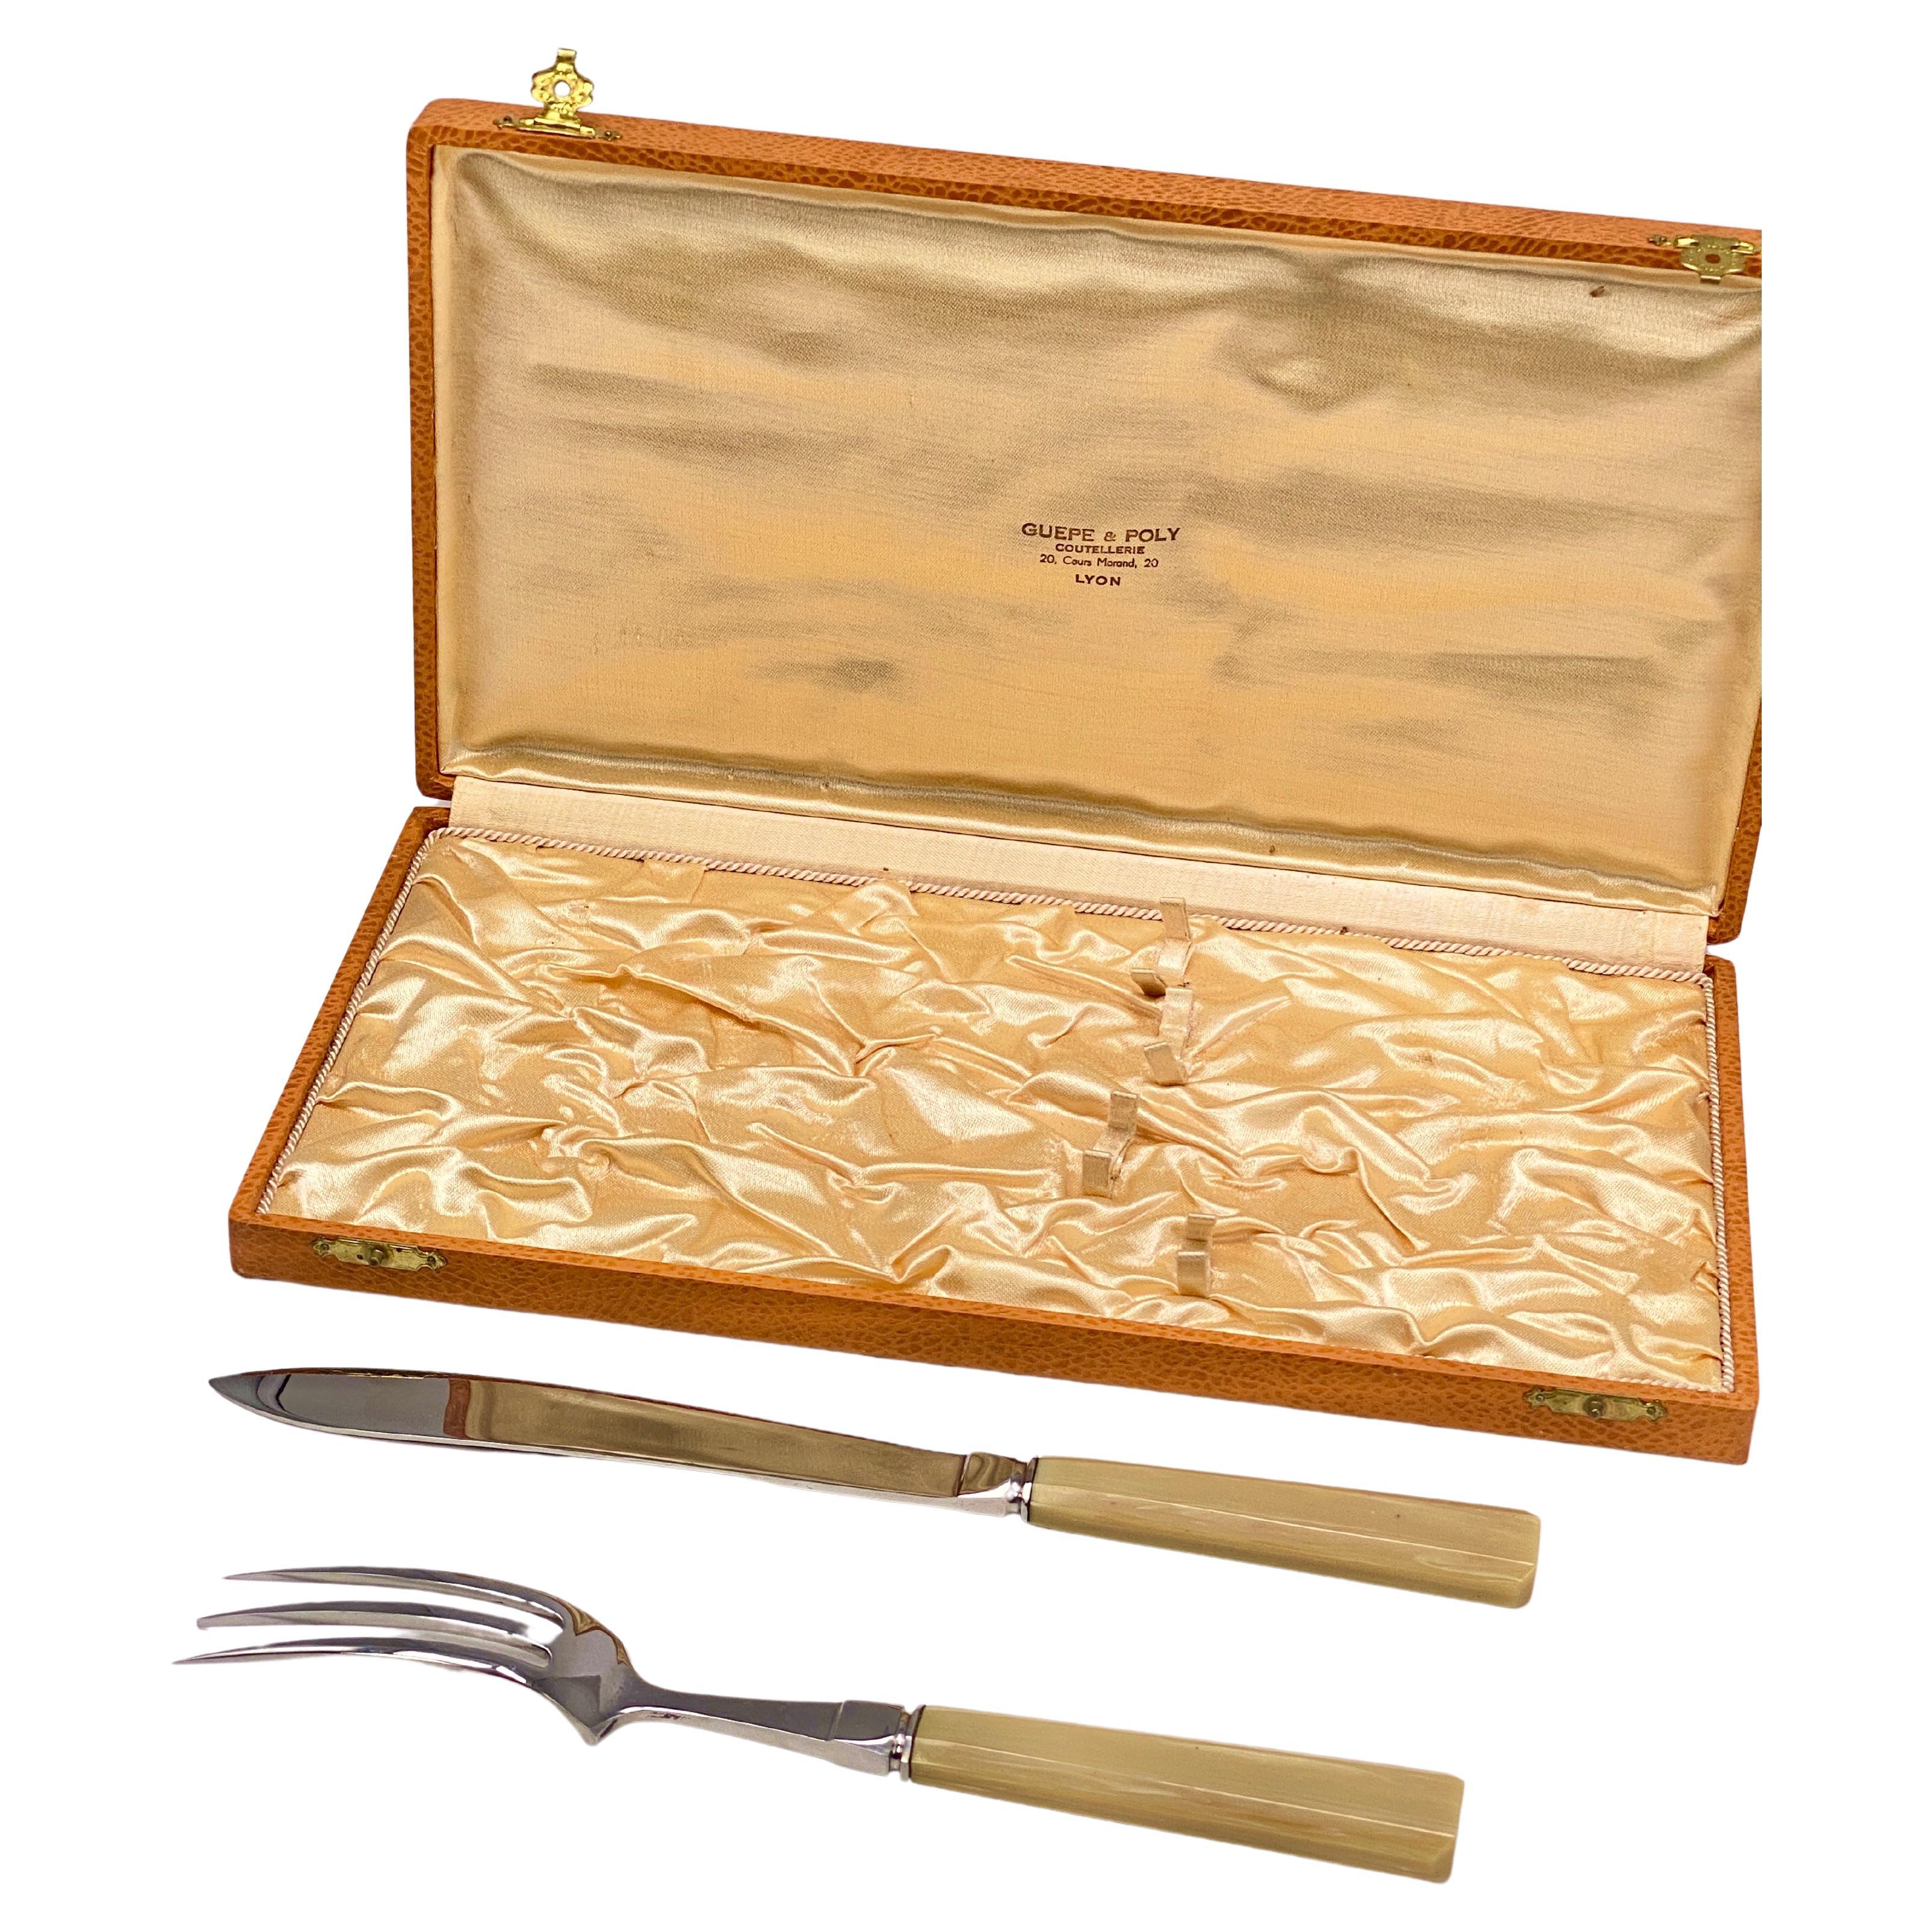 Goldsmith lamb cutlery by Guepe & Poly, France 1970, Fork and Knife 2 pieces